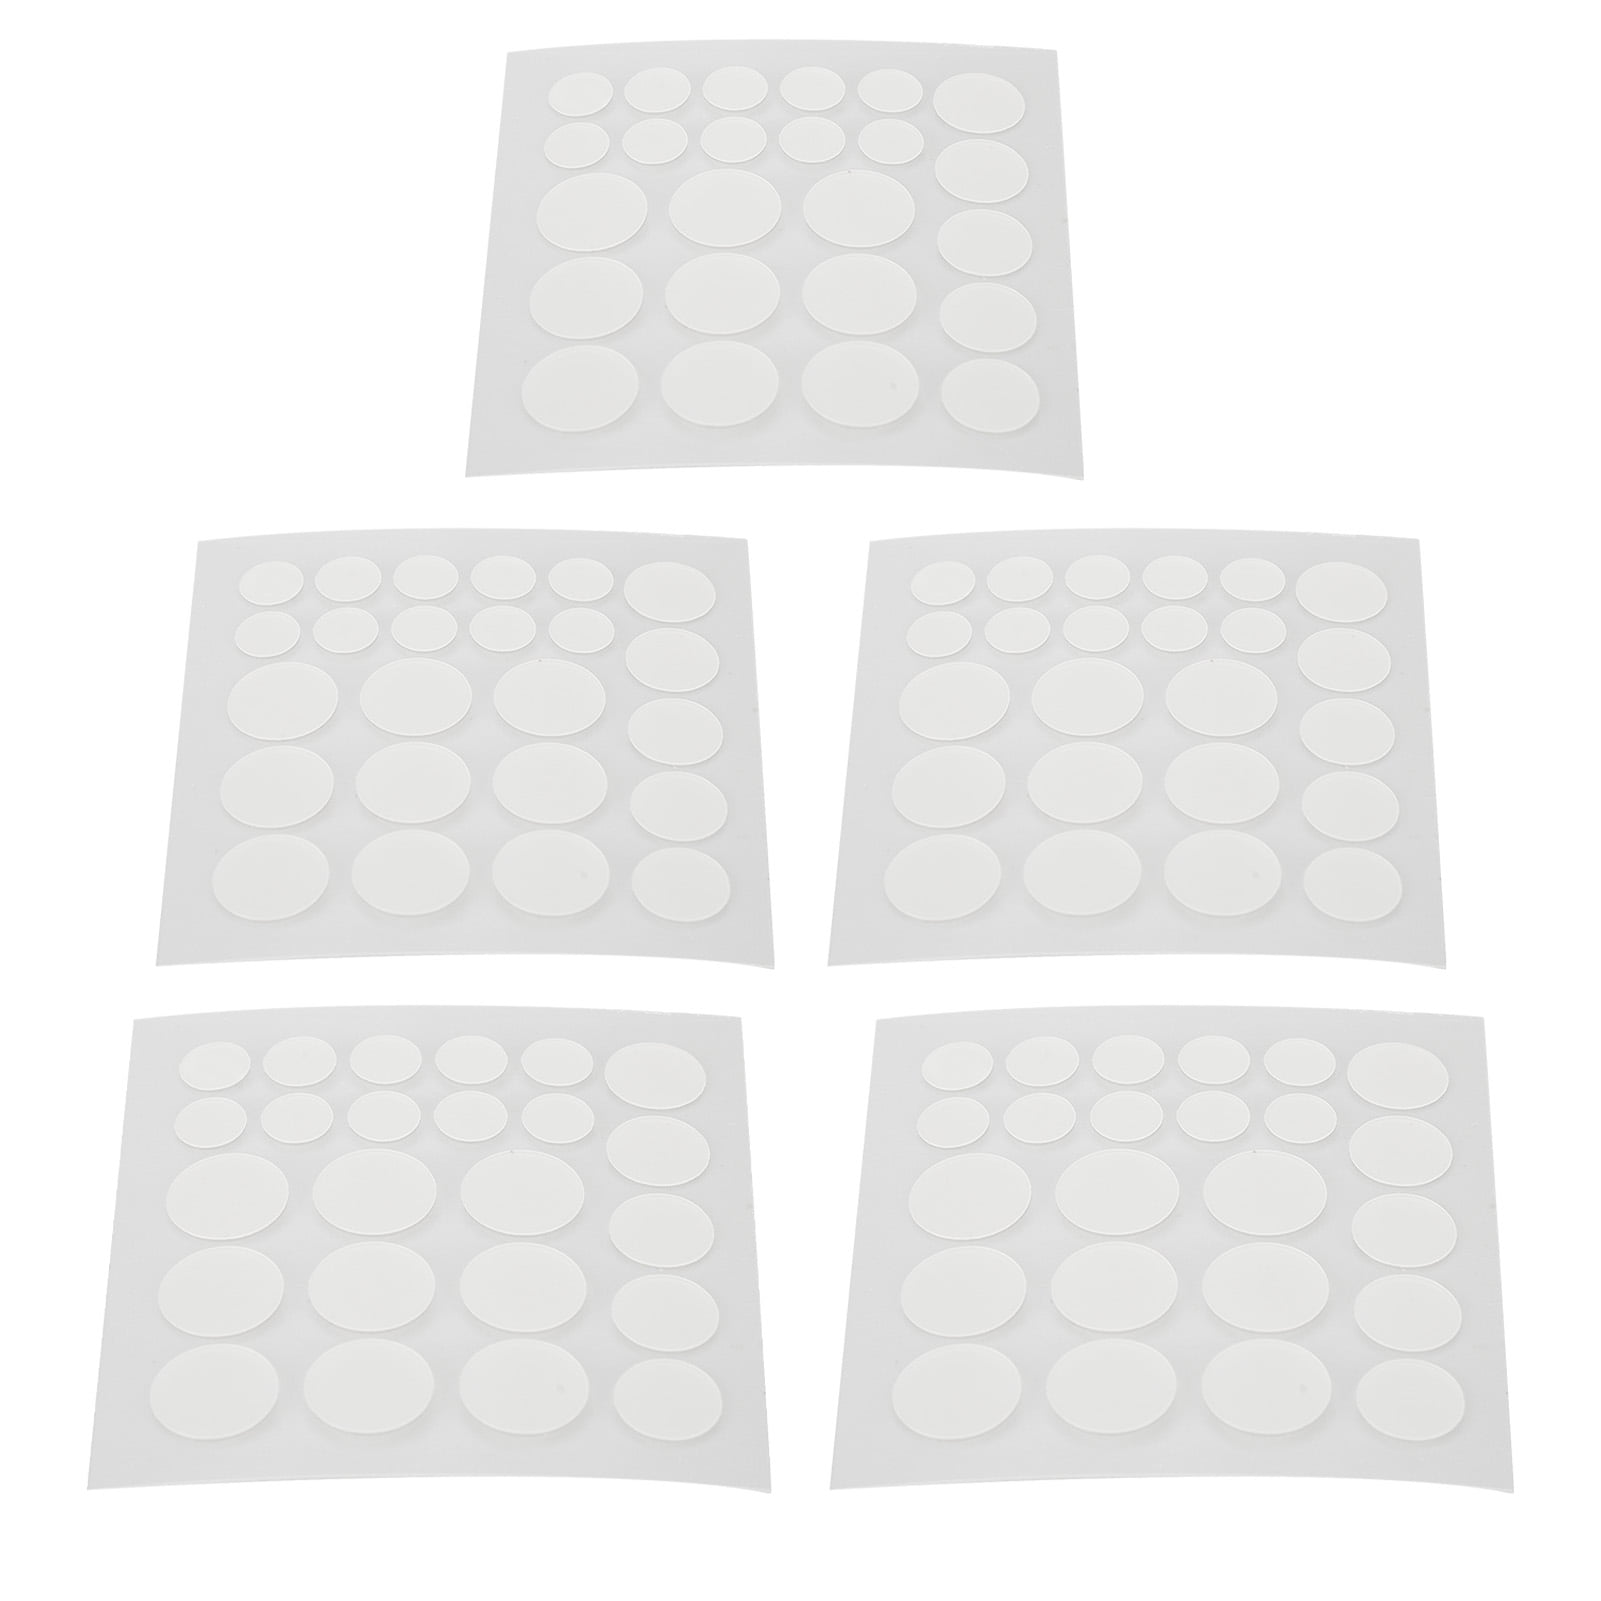 Dexcom G7 Adhesive Patches - LiangMai 20 Pack Waterproof & Transparent  Overpatch CGM Stickers for G7 Sensor 